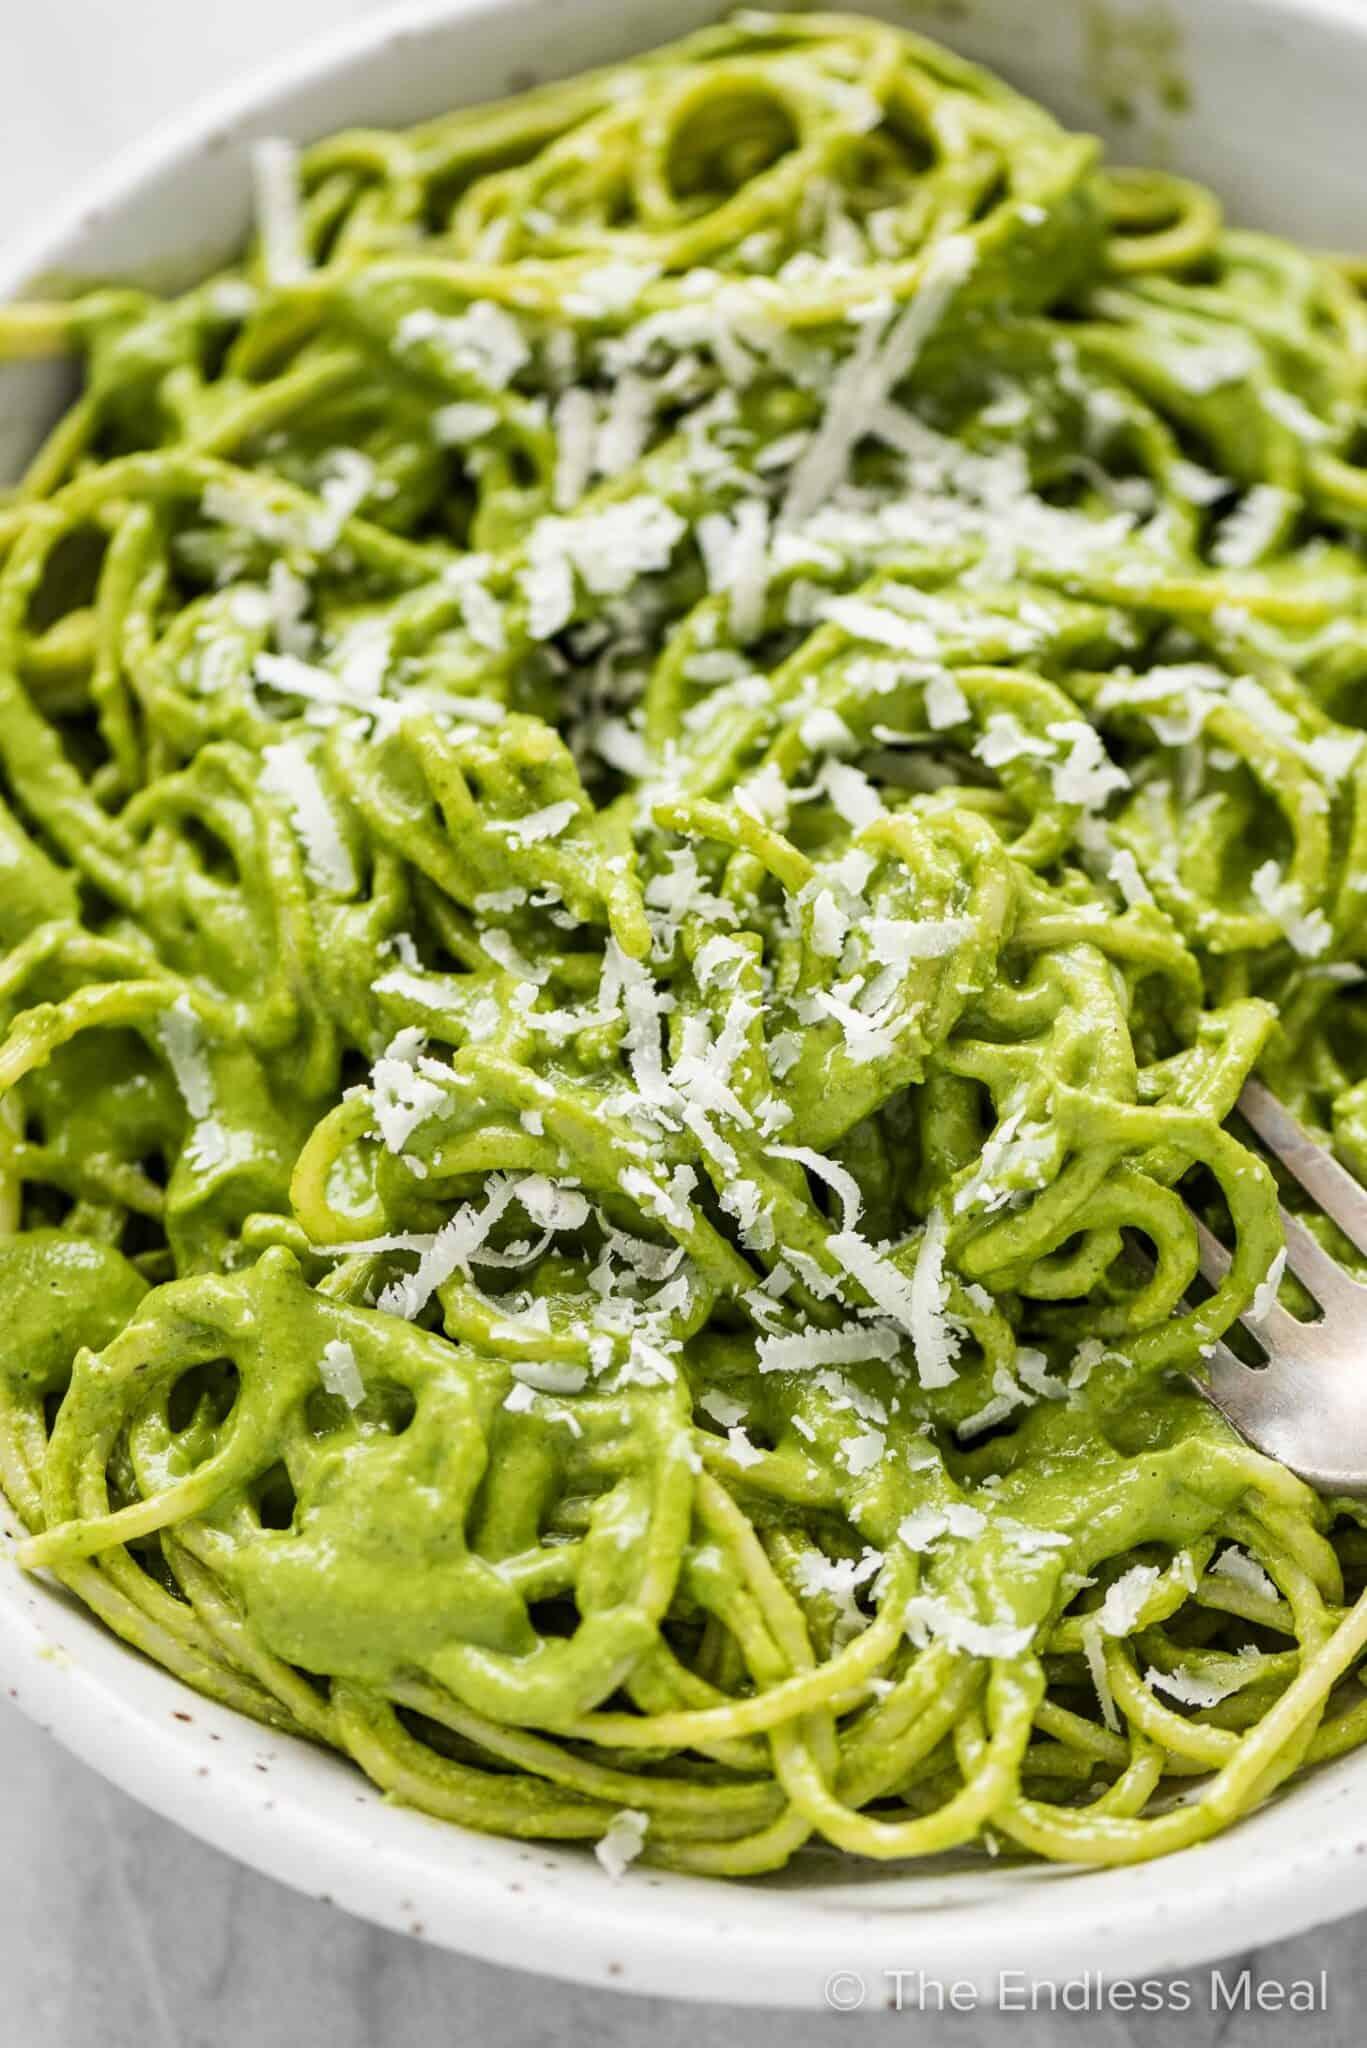 Serve this creamy sauce in just 5 minutes. Use it to drown your favorite pasta shape or roasted cauliflower rice in pure deliciousness. (via <a href="https://www.theendlessmeal.com/creamy-pesto-sauce/"><strong>The Endless Meal</strong></a>)